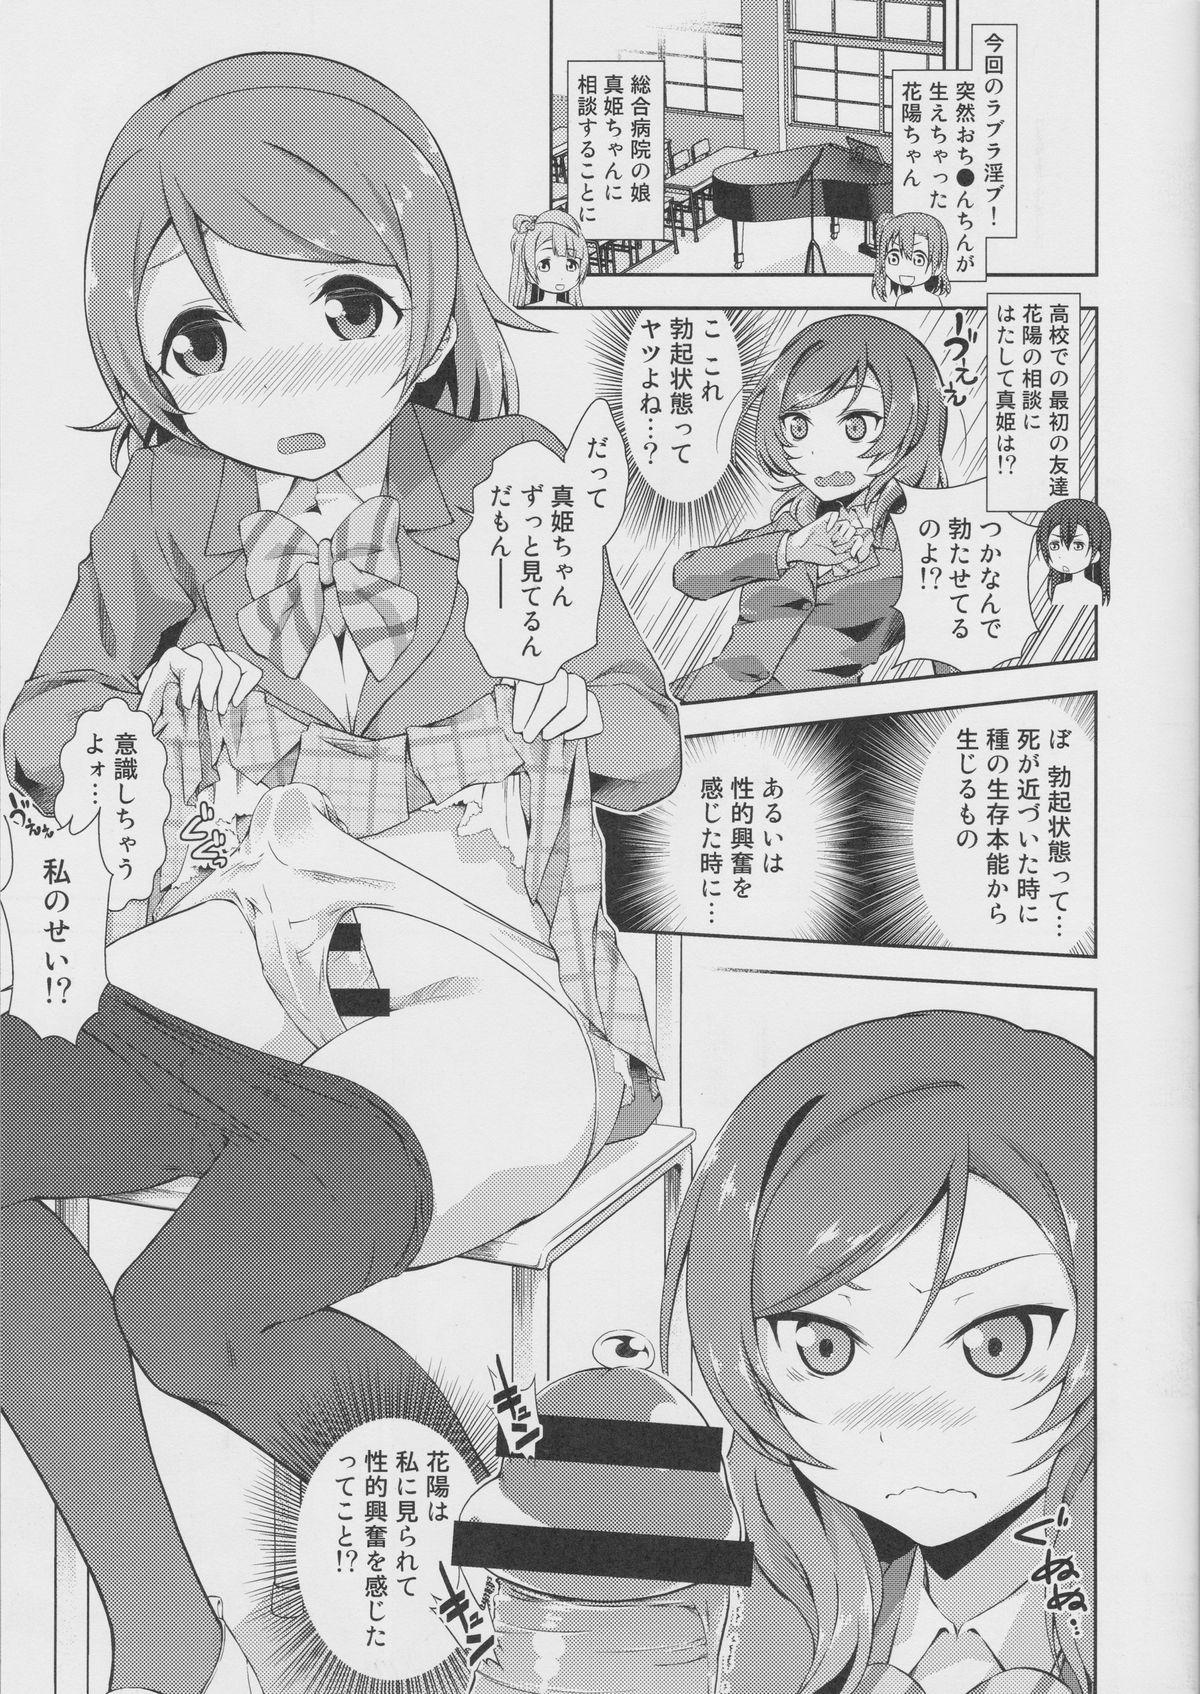 Old And Young Love Linve! 2 - KayoChinpo - Love live Monster - Page 2